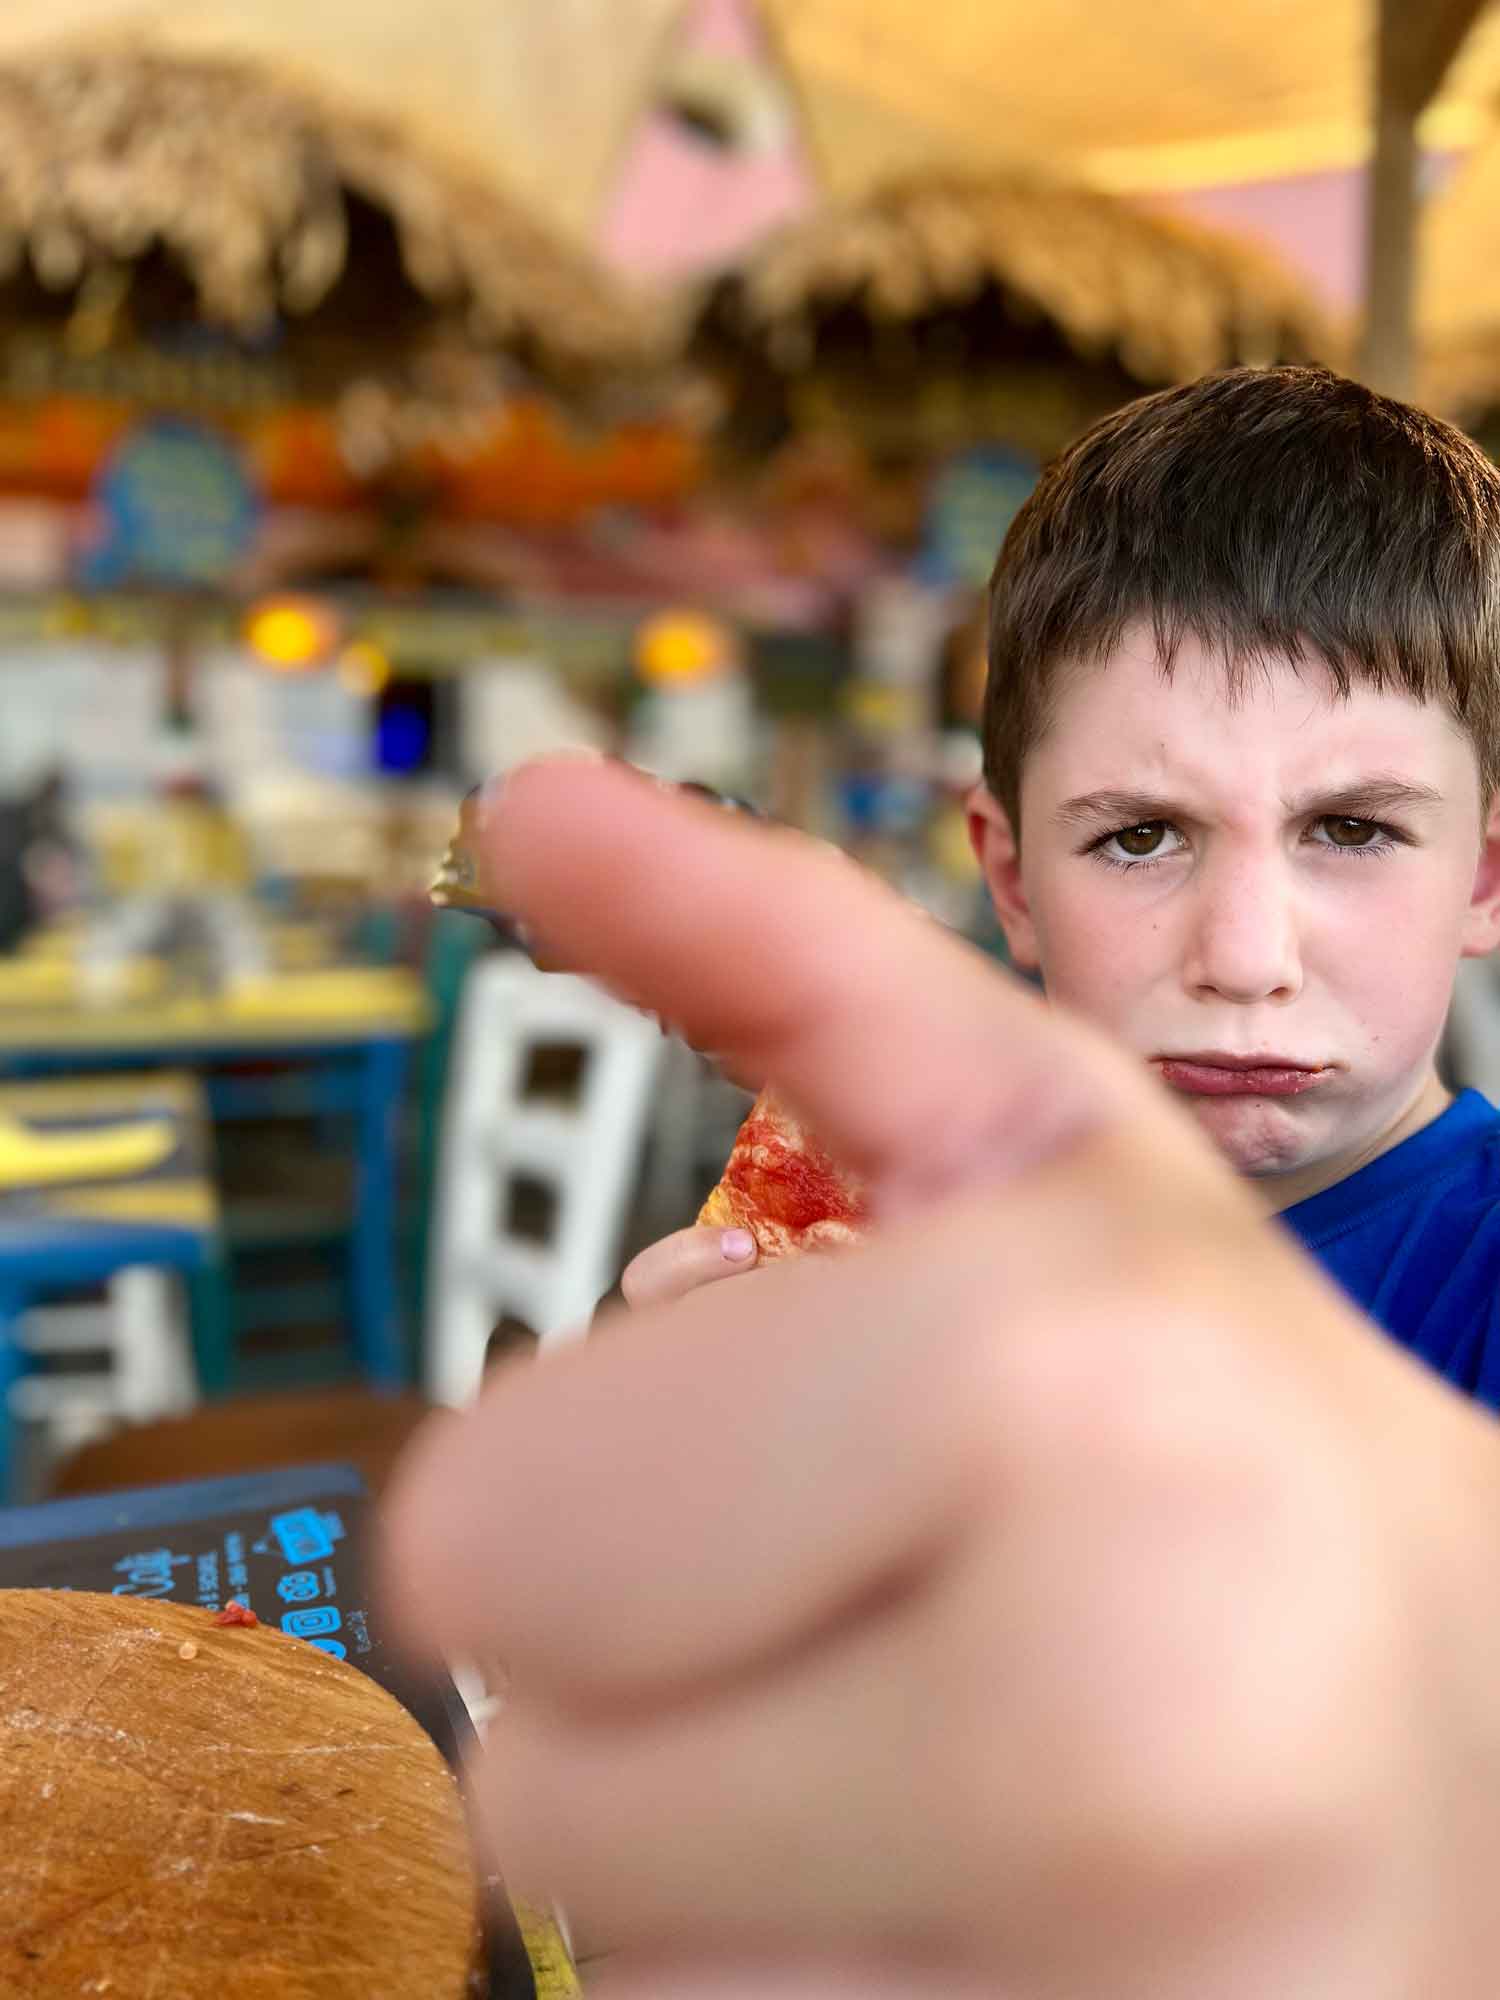 Kid trying to eat pizza with a frown